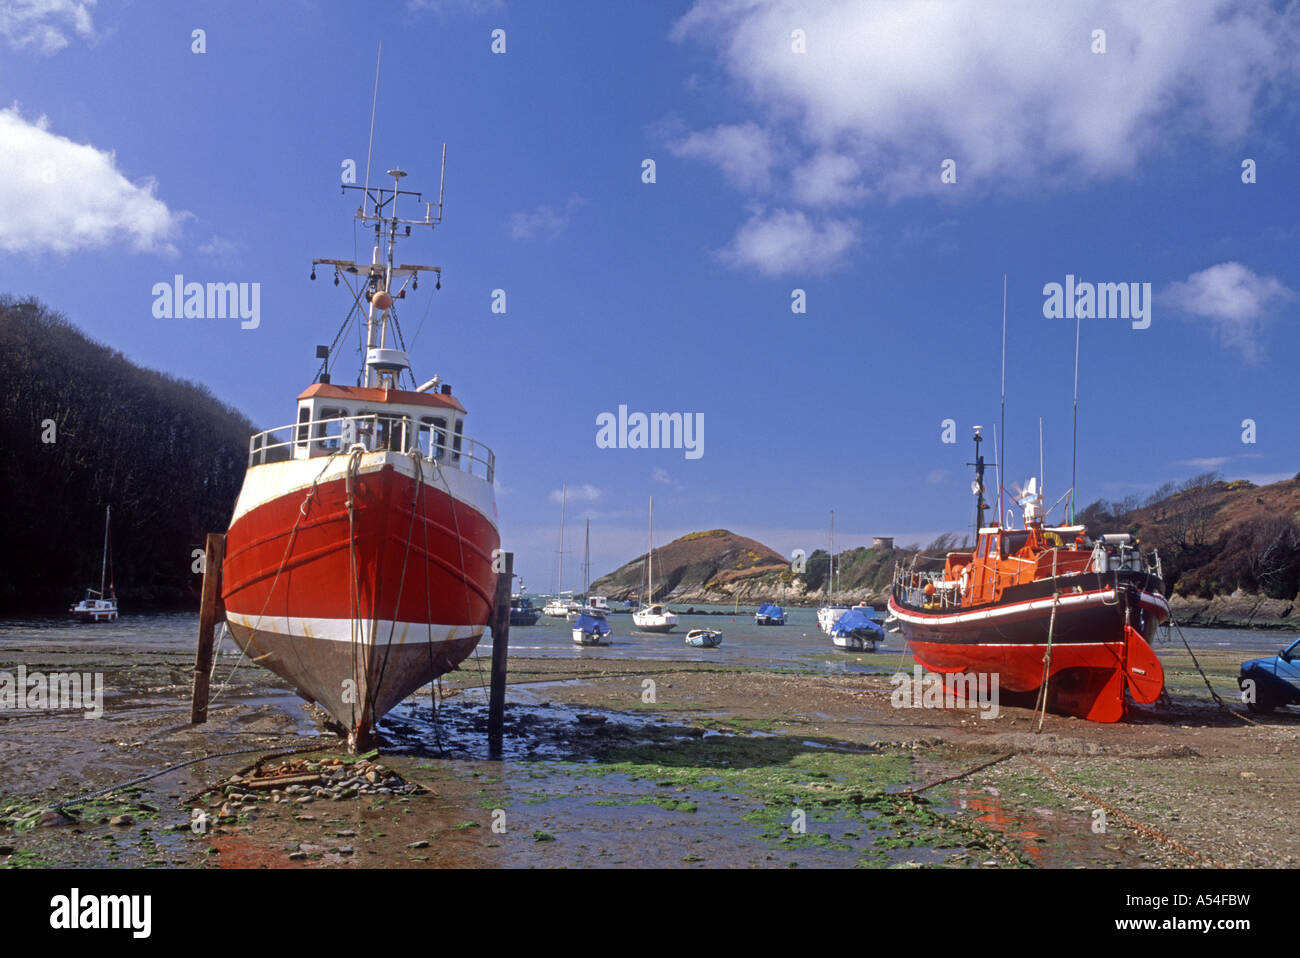 Watermouth North Devon provides a sheltered cove and boat mooring.  XPL 4764-447 Stock Photo